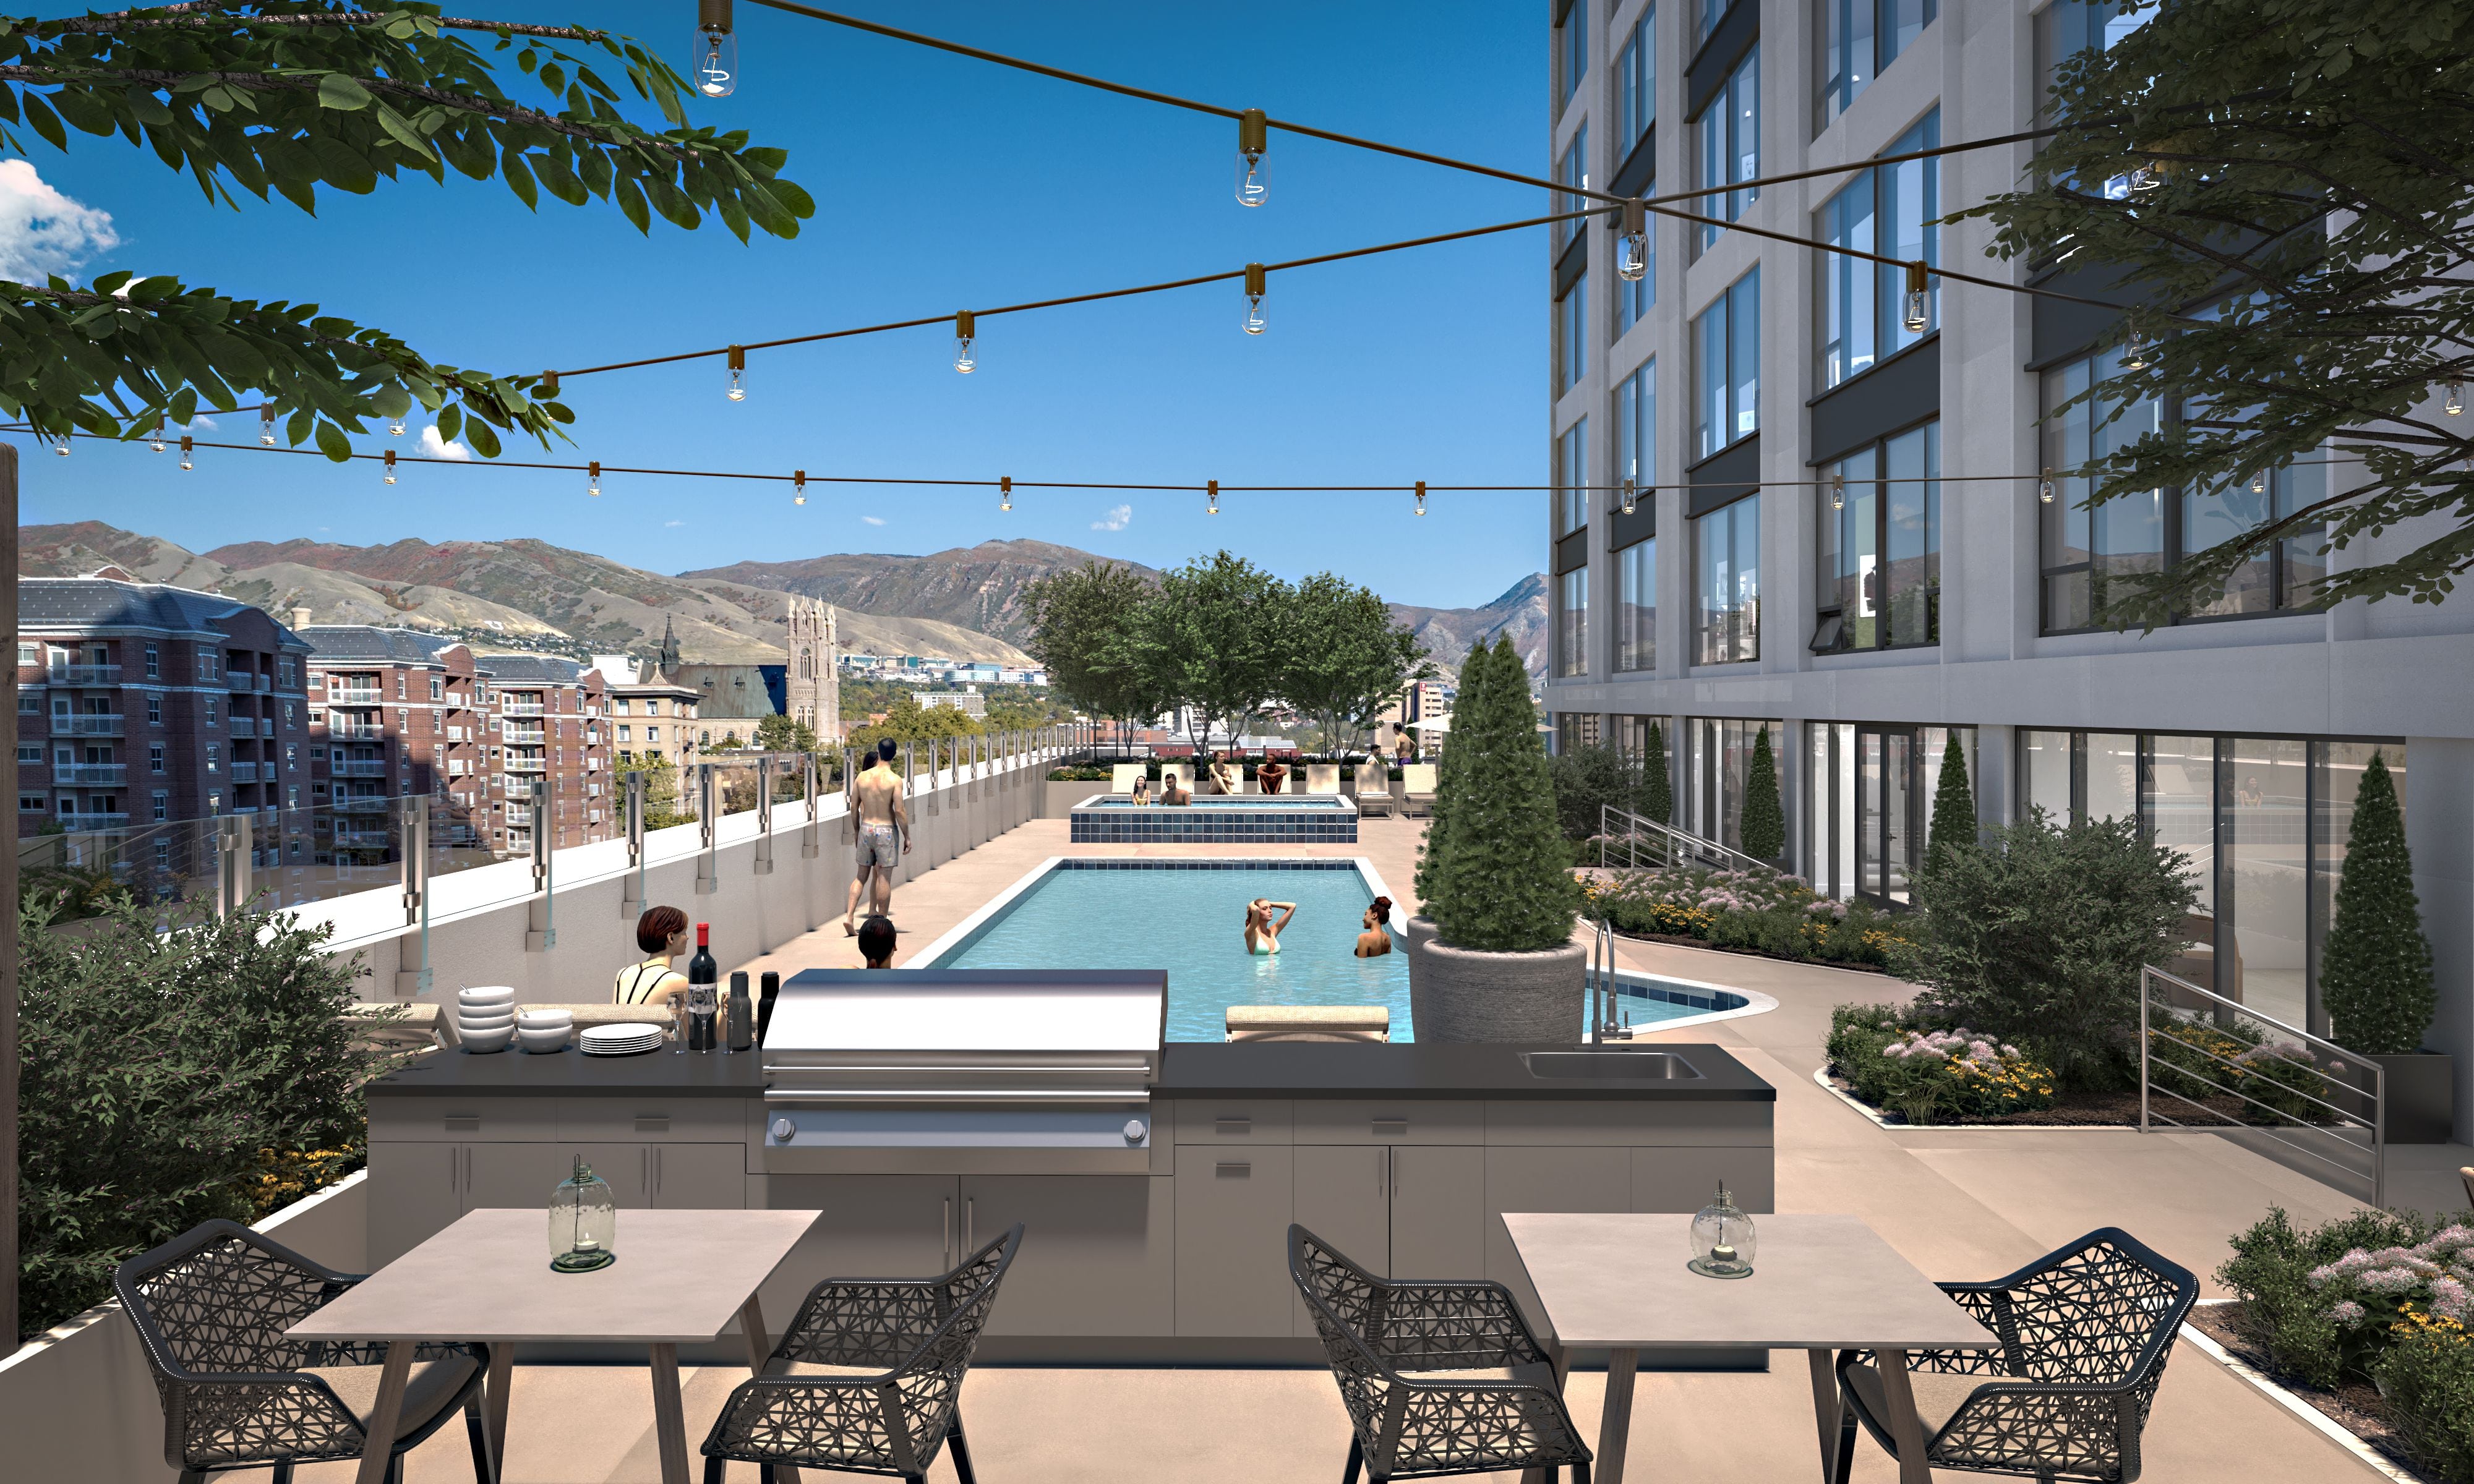 (Hines) Rendering of a pool planned for South Temple Tower, part of an office-to-residential remake of 136 E. South Temple in Salt Lake City.